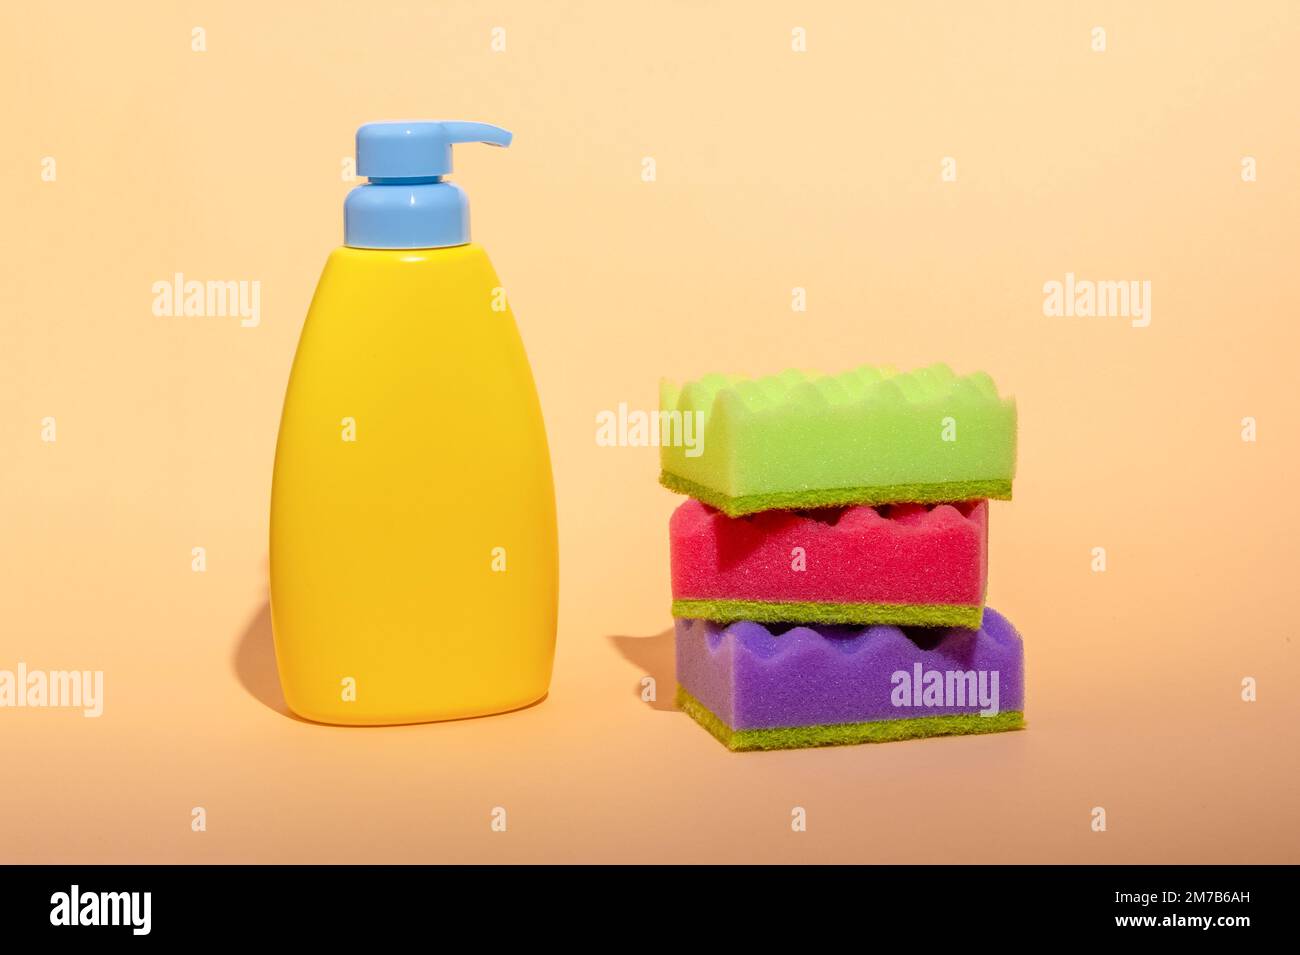 Stack of multi-colored dish wash sponges with bottle of soap on pastel orange background. Household cleaning scrub pad. Home cleaning concept. Stock Photo